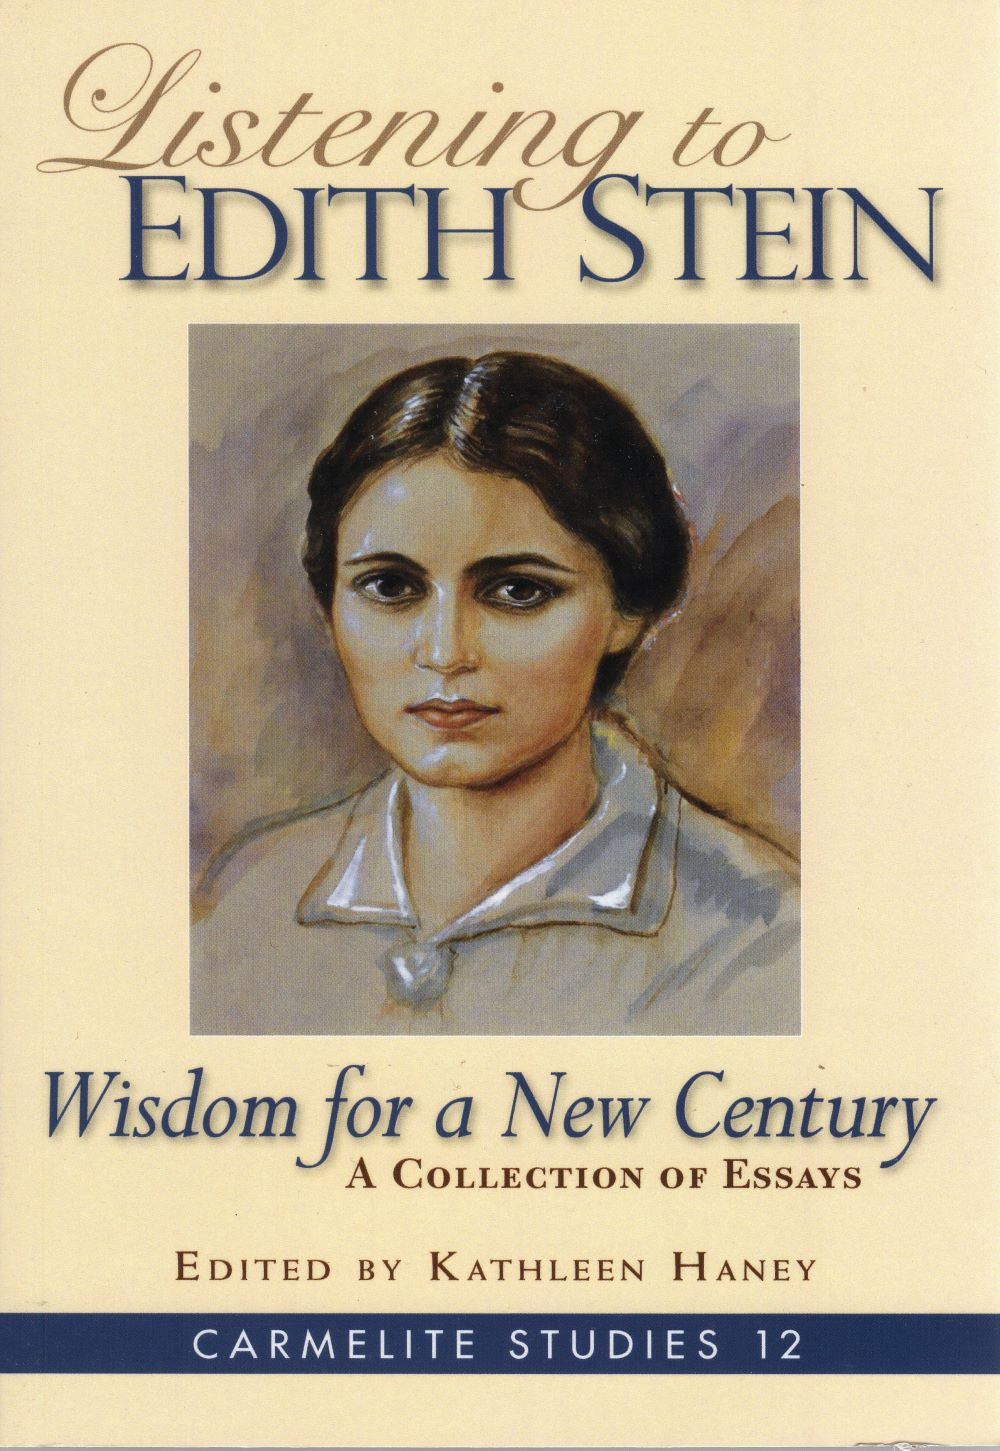 LISTENING TO EDITH STEIN: Wisdom for a New Century